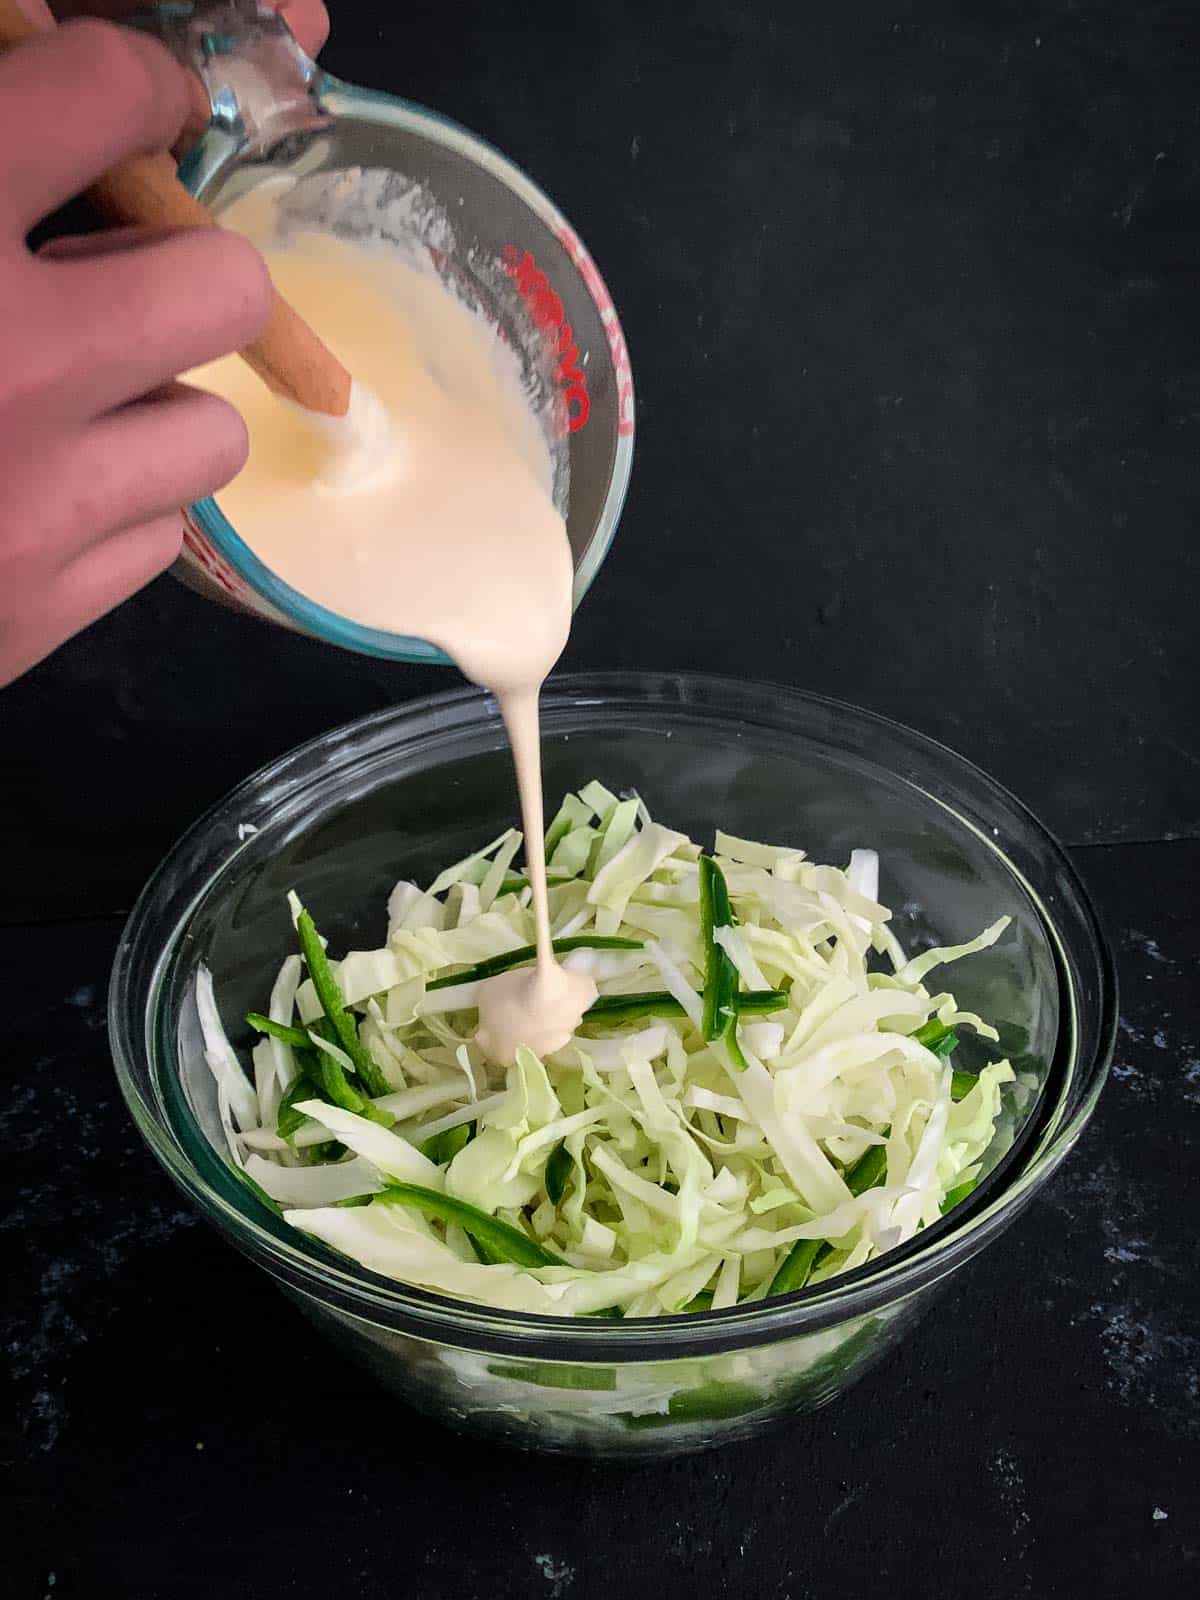 Pouring coleslaw dressing into a mixing bowl of coleslaw vegetables